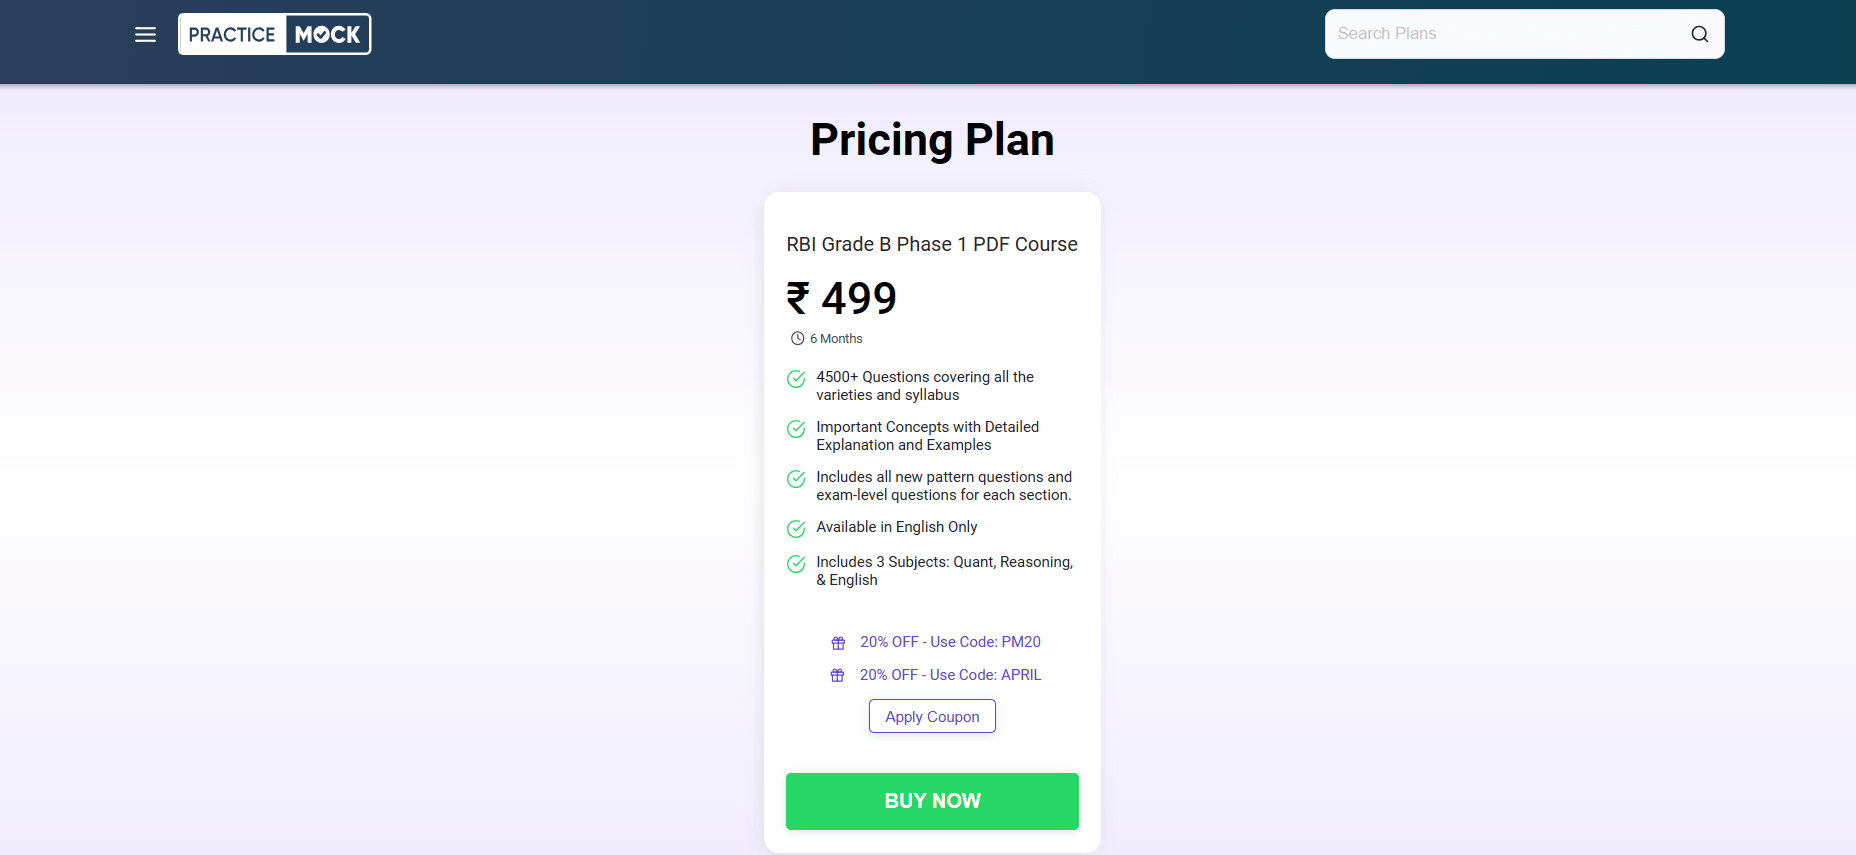 You can click on the BUY TEST option to purchase a PDF course